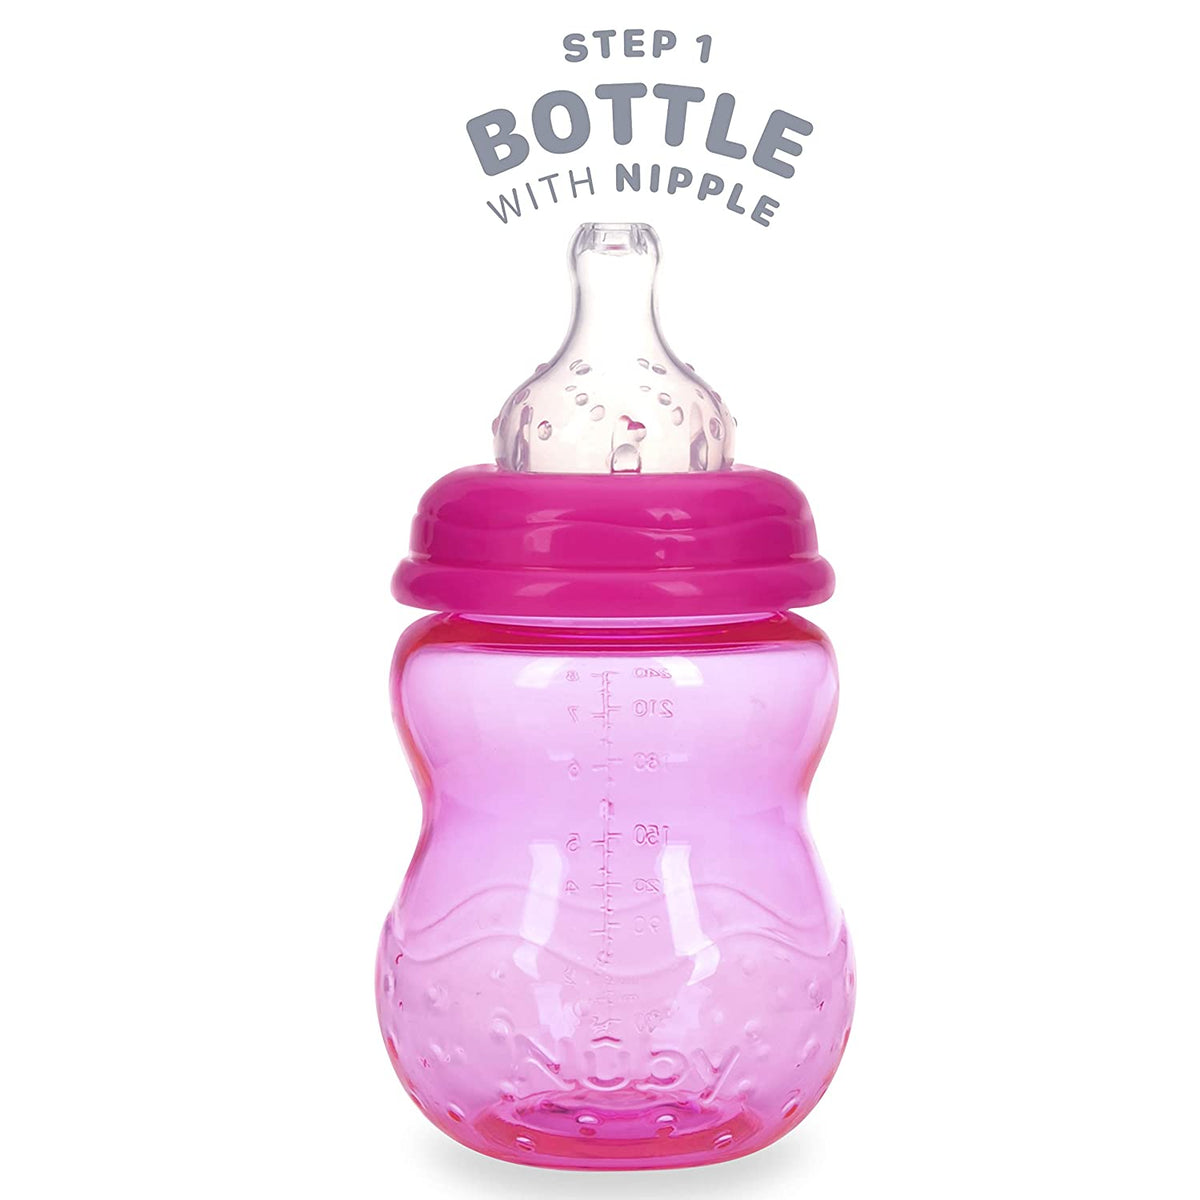 No-Spill Glow Cup - Lighten up your next sippy cup with Pink Glow! 